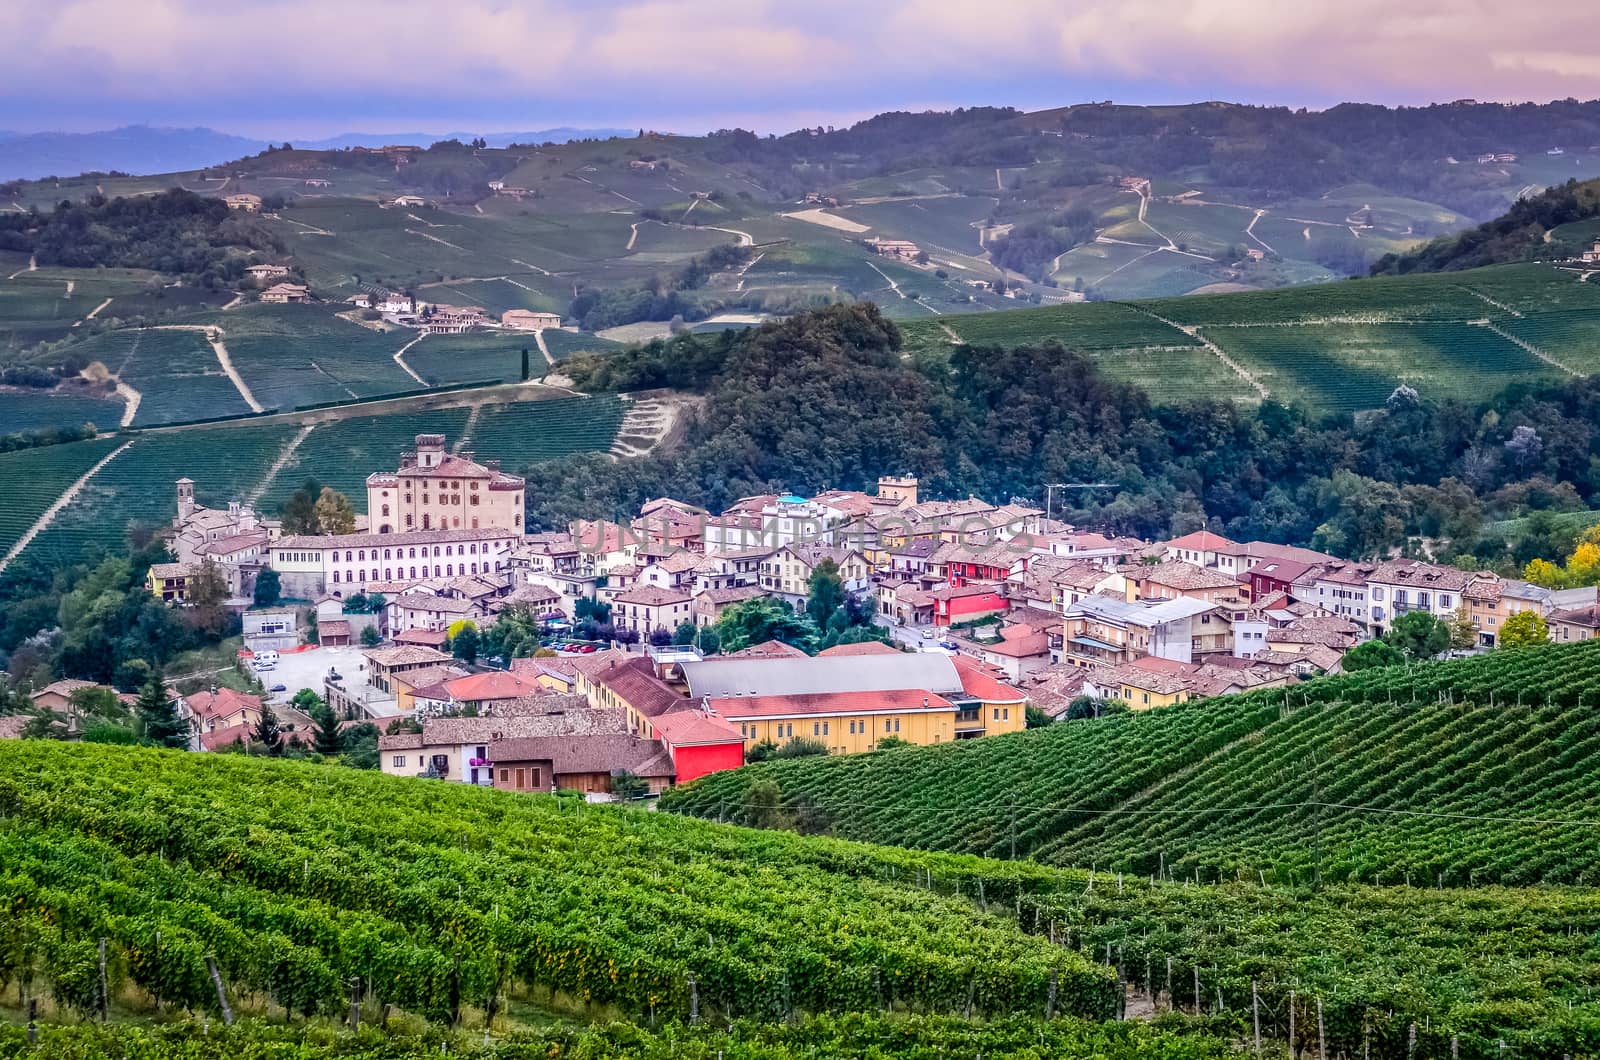 Scenic view of Barolo village in Italy by martinm303